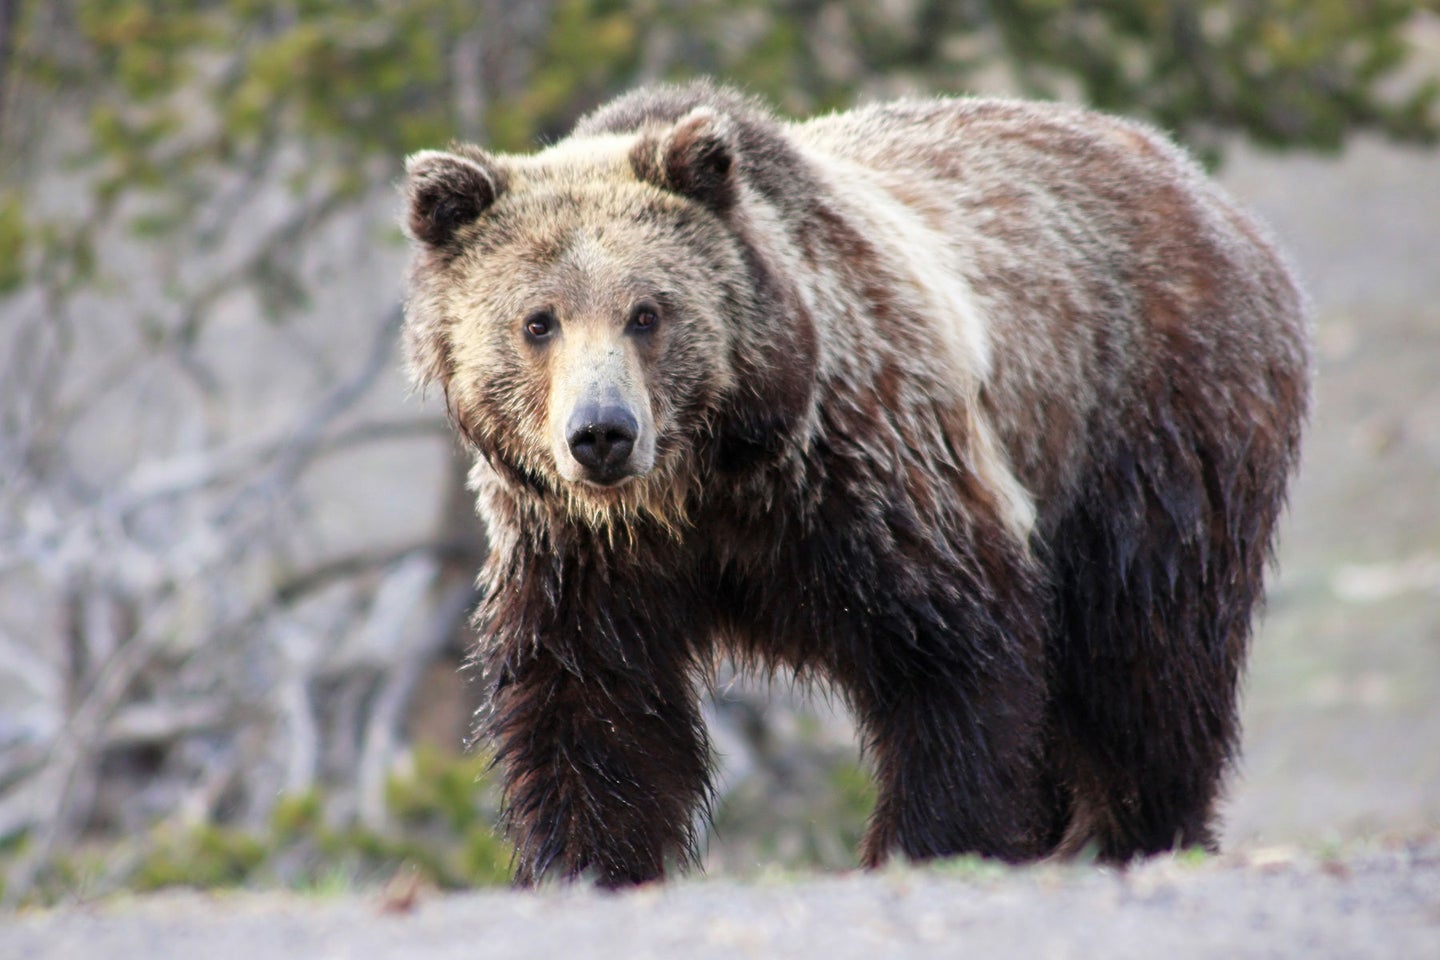 There are an estimated 2,000 grizzly bears in the Lower 48.